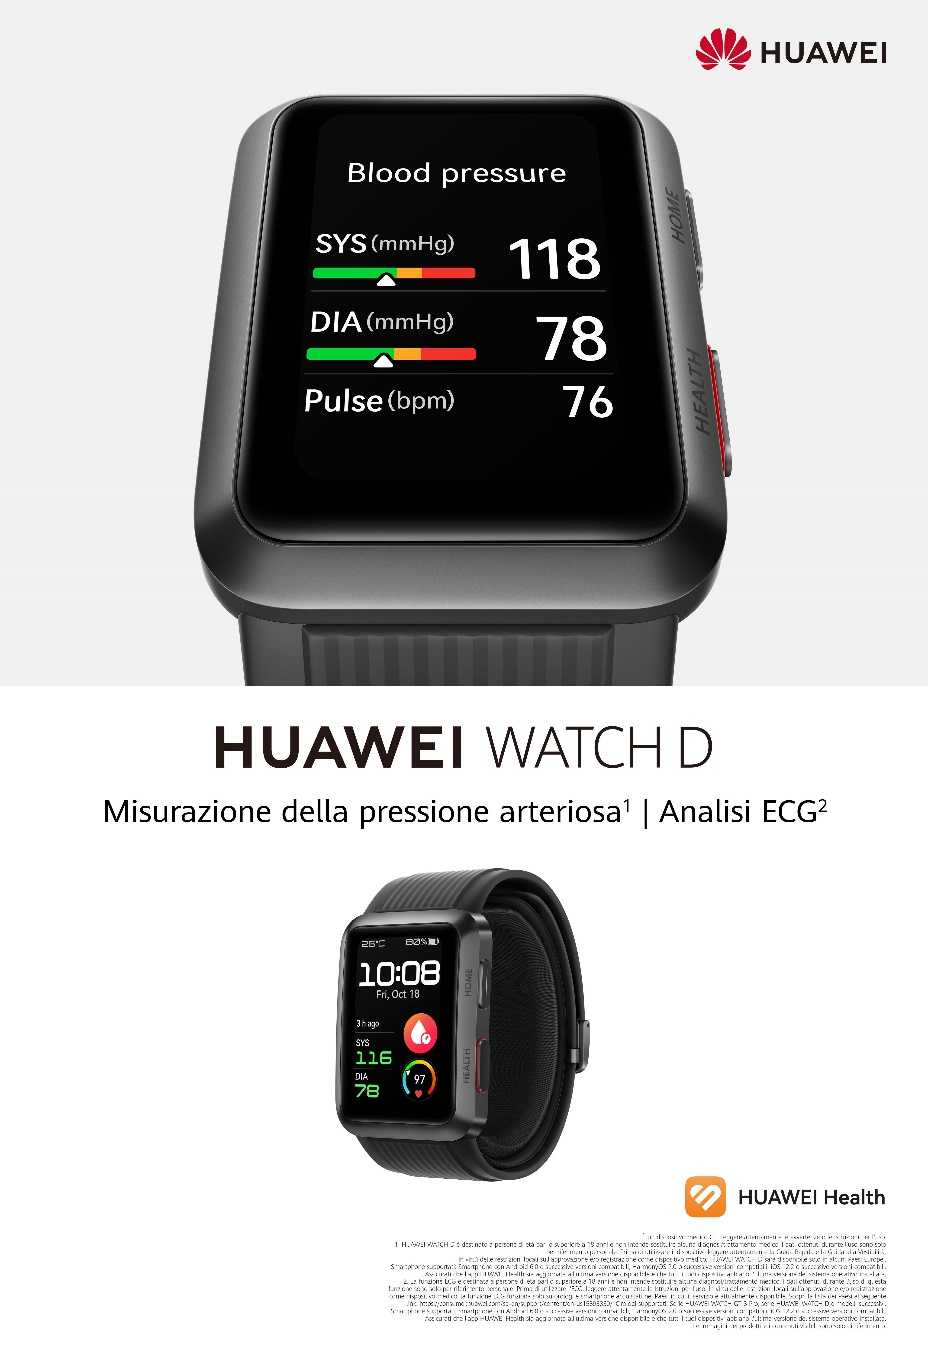 Huawei: announced the arrival in Italy of the Watch D